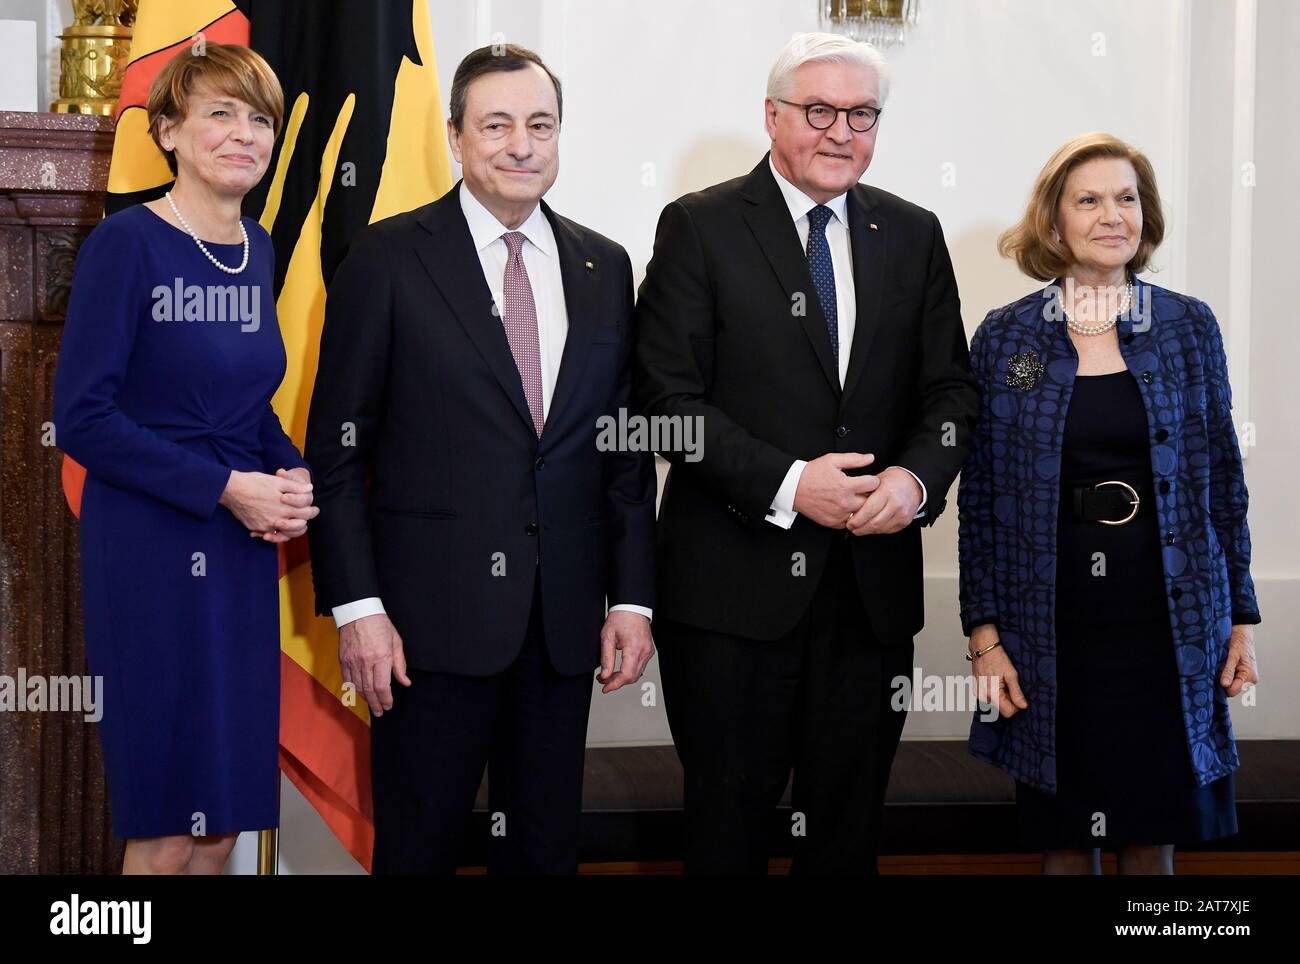 Berlin, Germany. 31st Jan, 2020. Elke Büdenbender (l-r), the wife of the Federal President, former ECB President Mario Draghi, Federal President Frank-Walter Steinmeier, and Draghis wife, Serena Draghi, stand at the award ceremony of the Federal Cross of Merit. Draghi received the Federal Cross of Merit from Federal President Steinmeier. Credit: Britta Pedersen/dpa-Zentralbild/dpa/Alamy Live News Stock Photo